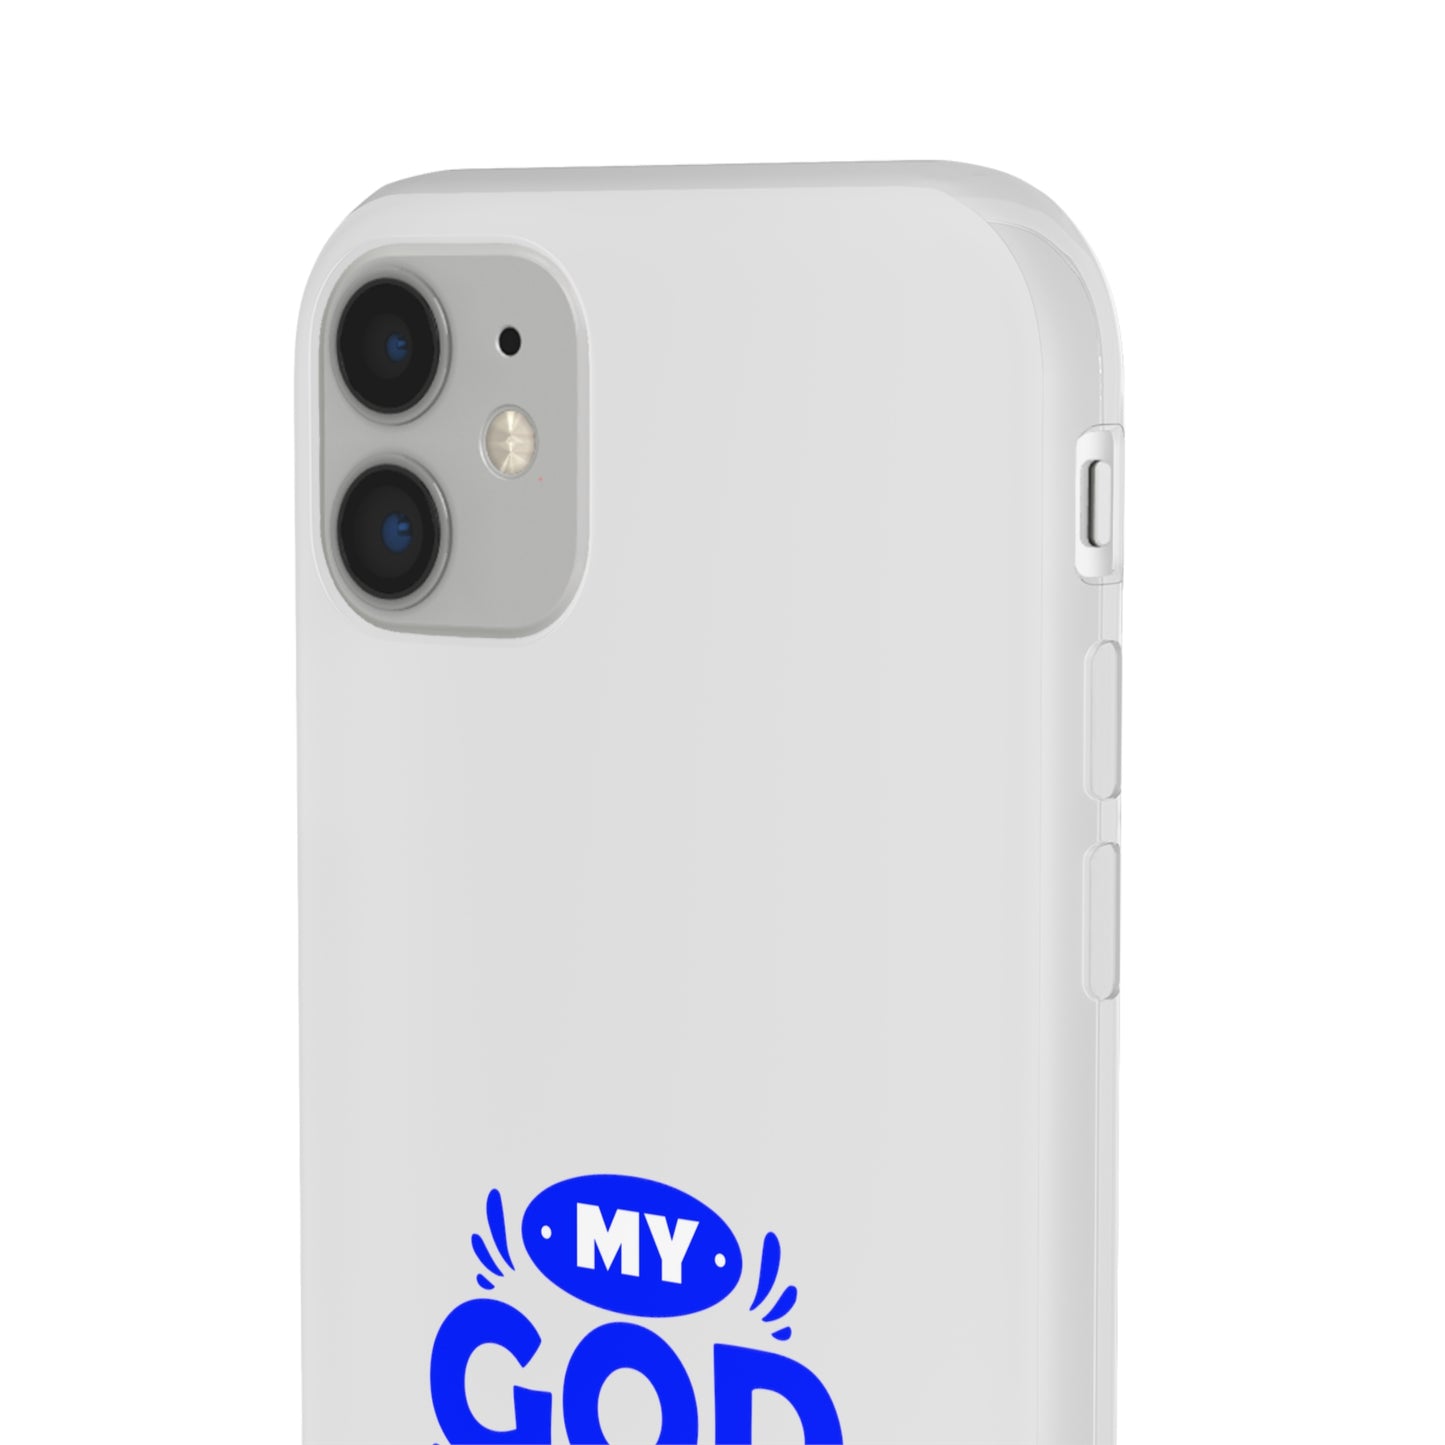 My God Is Intentional  Flexi Phone Case